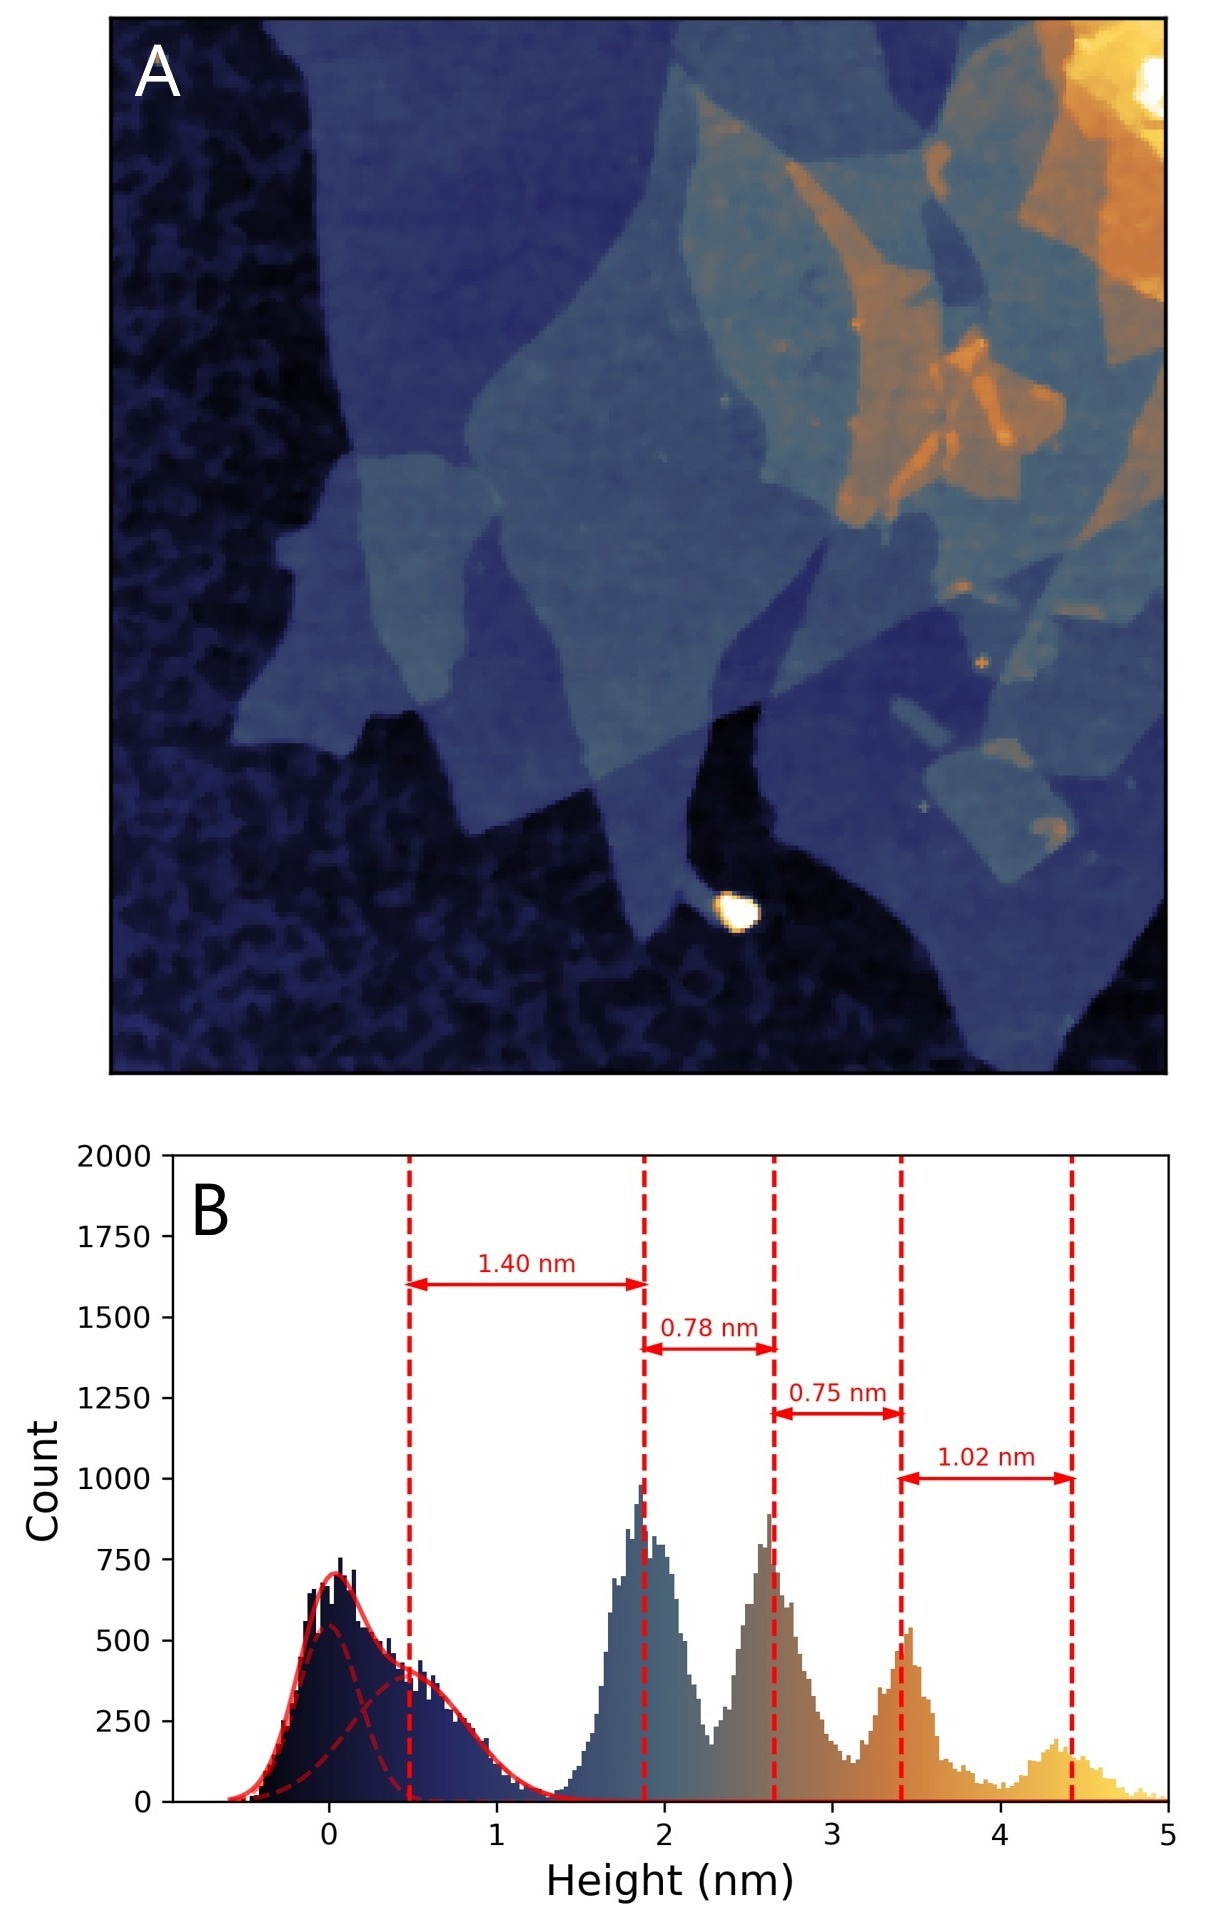 Measuring the thickness of multilayer graphene. (A) AFM topographical image of graphene oxide with lateral dimensions of 5.11 x 5.11 µm2. (B) Histogram of the heights in (A) showing the thickness of the first 4 layers.